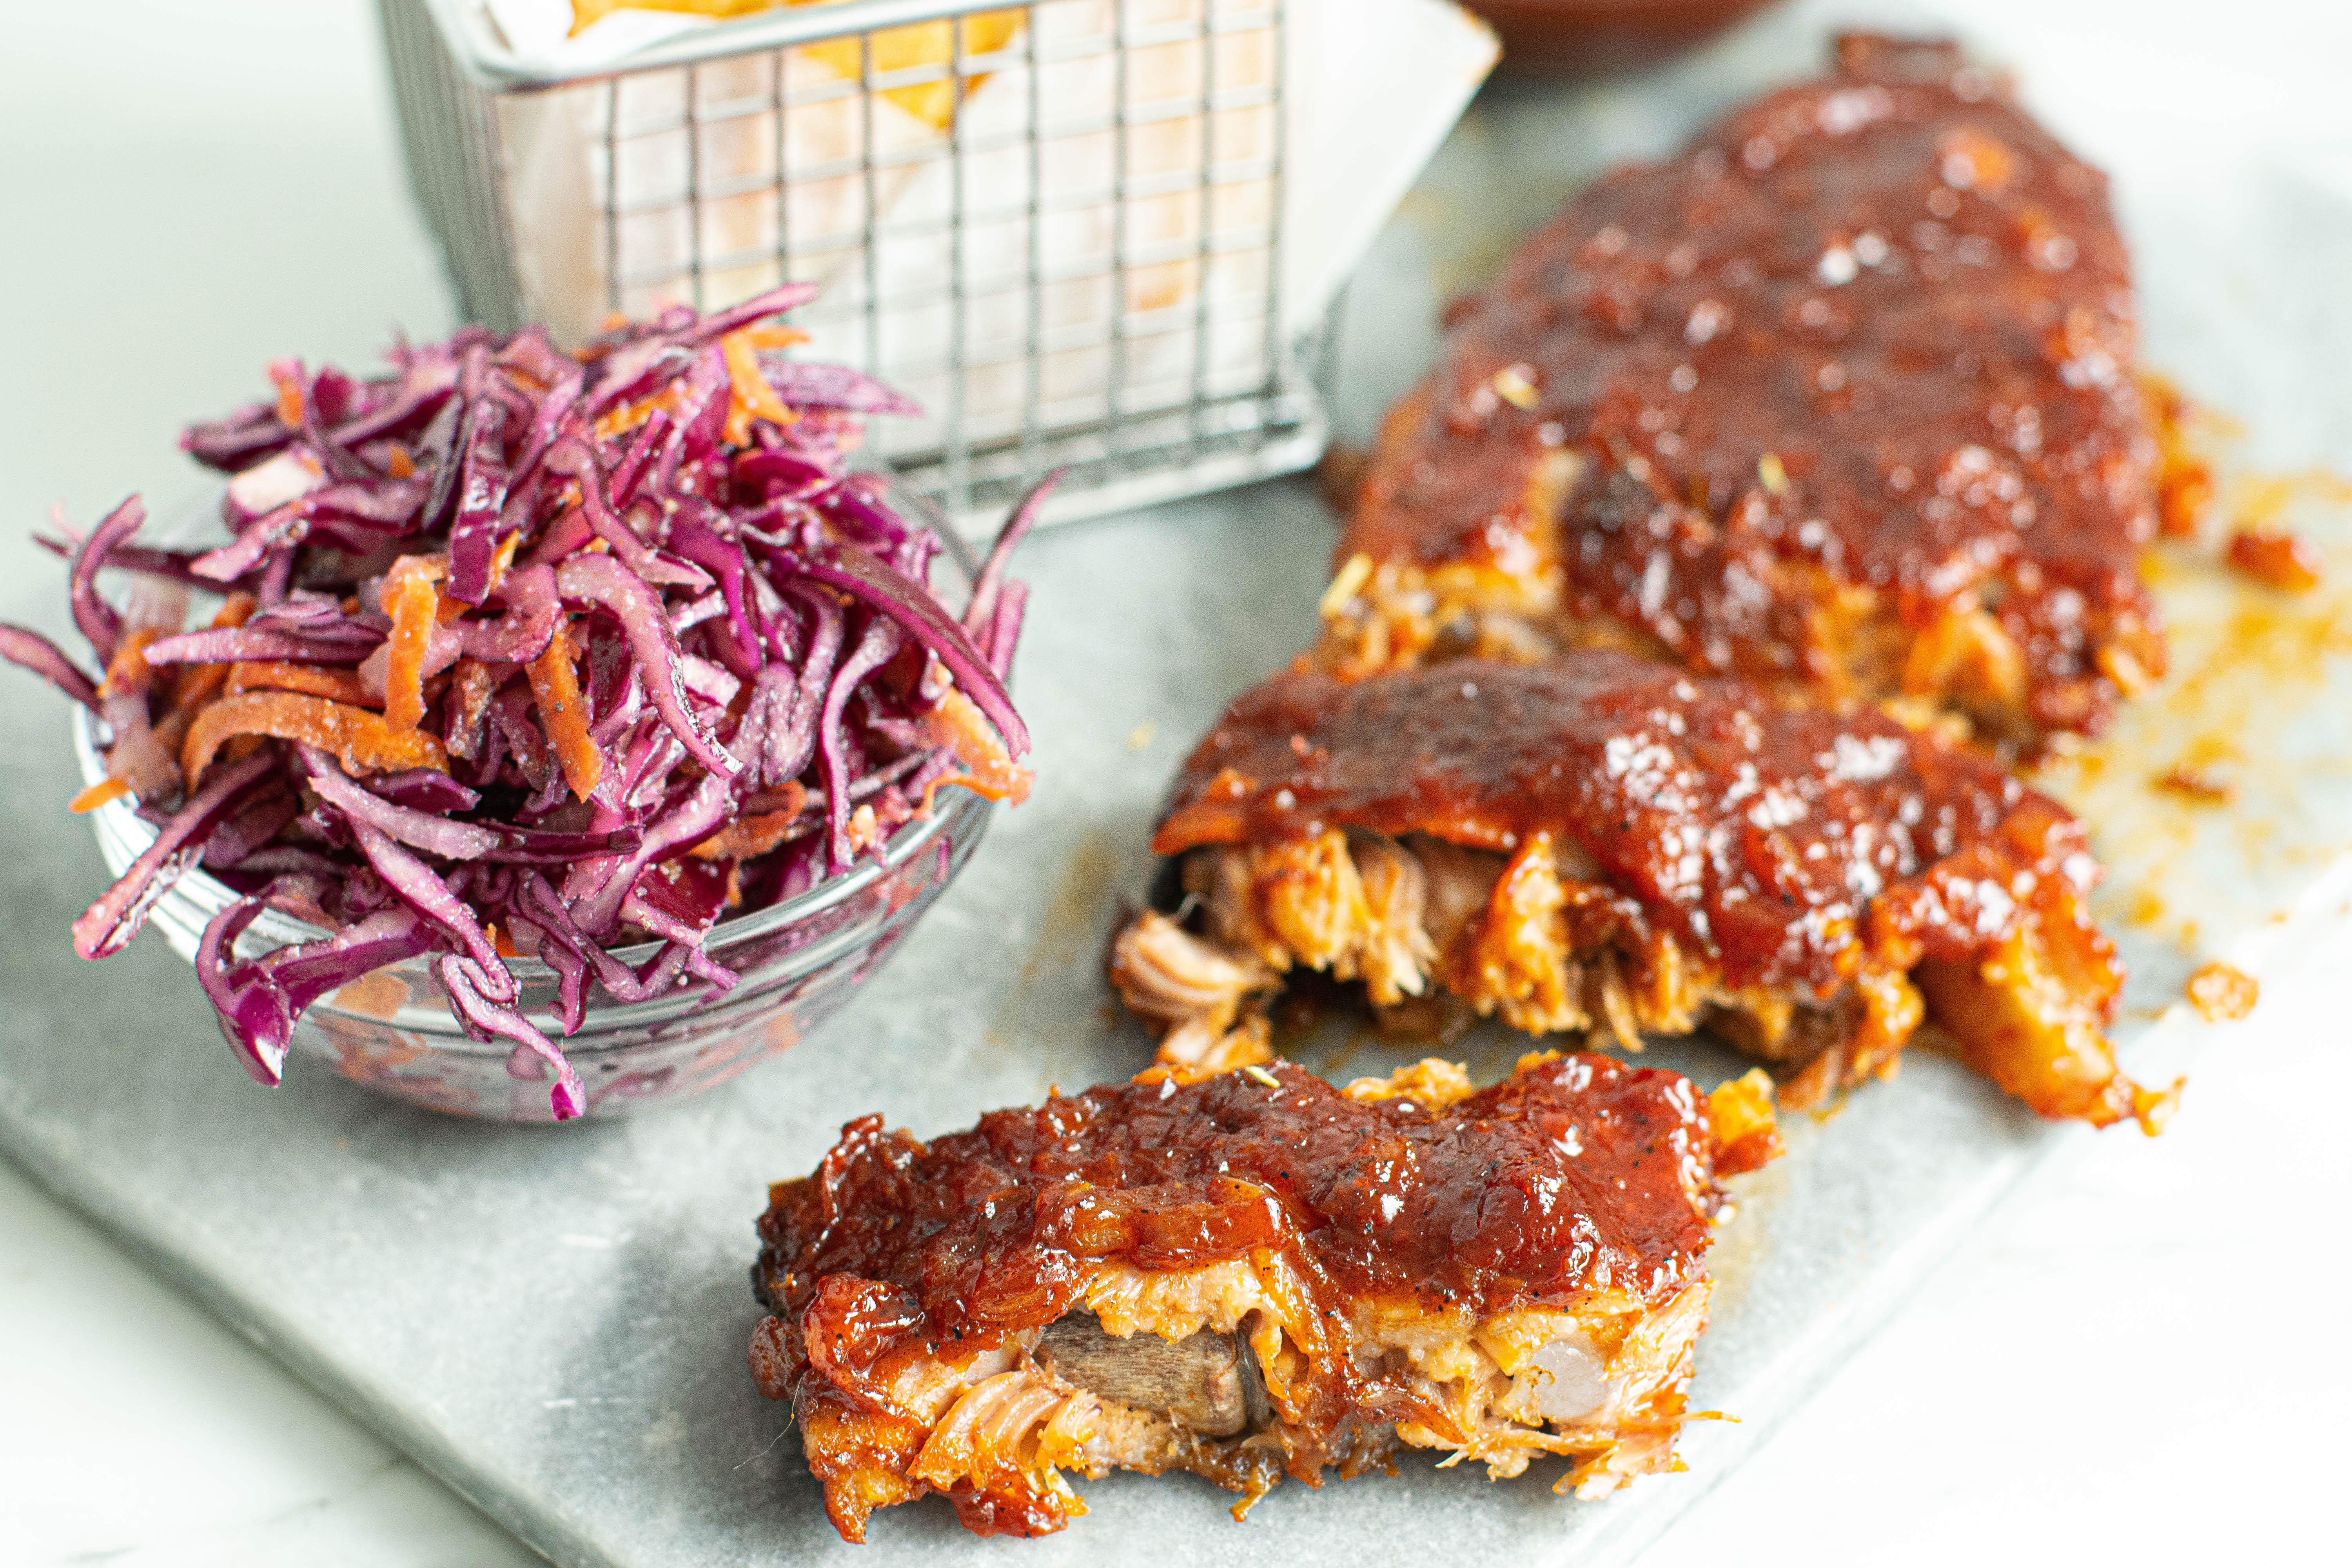 BBQ pork ribs baked in the oven - foil